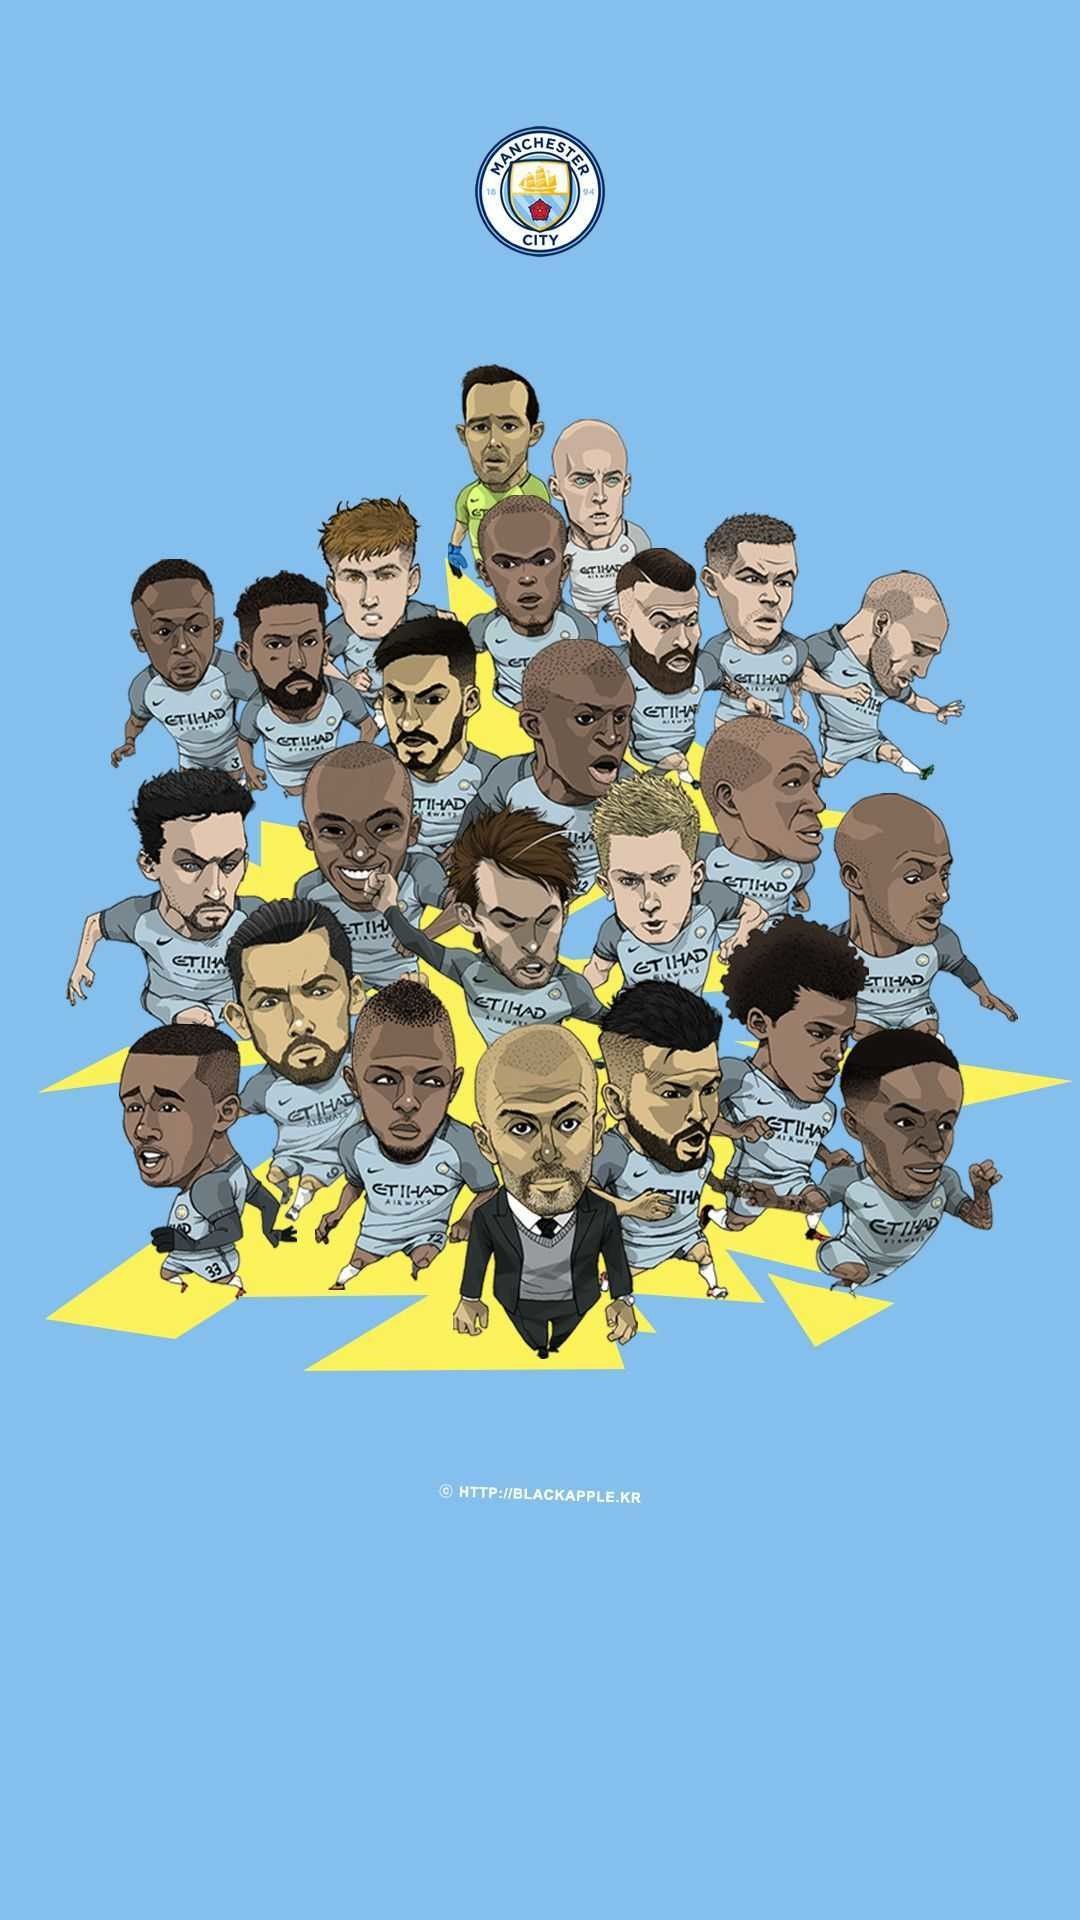 Man City 2018 Wallpaper background picture